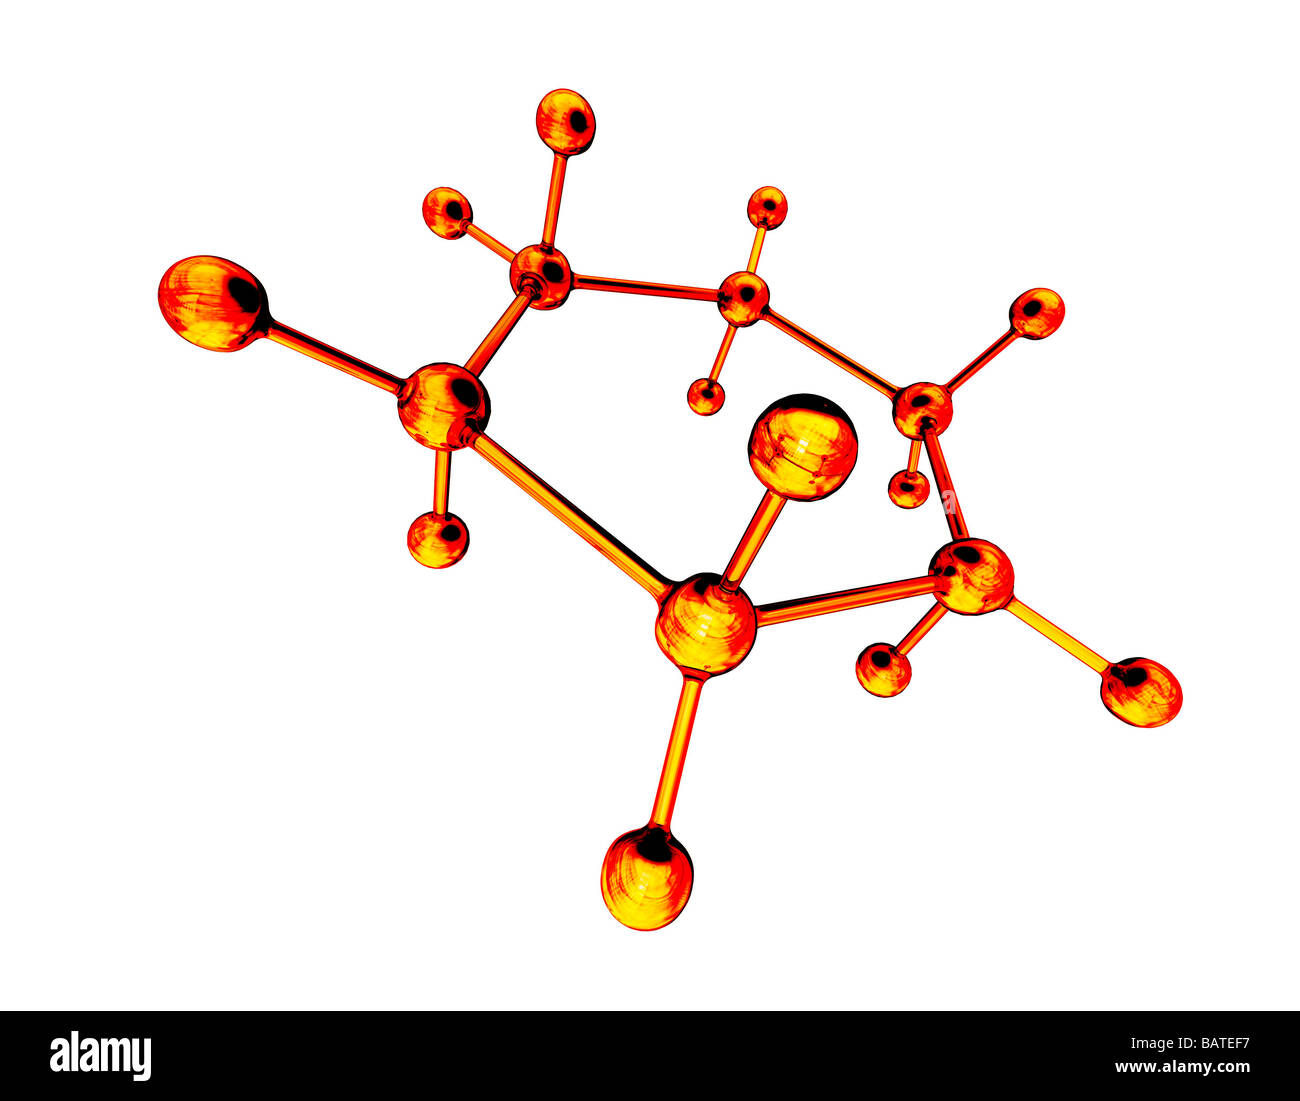 Molecular structure, computer artwork. Atoms are shown as spheres and the bonds between them as rods. Stock Photo